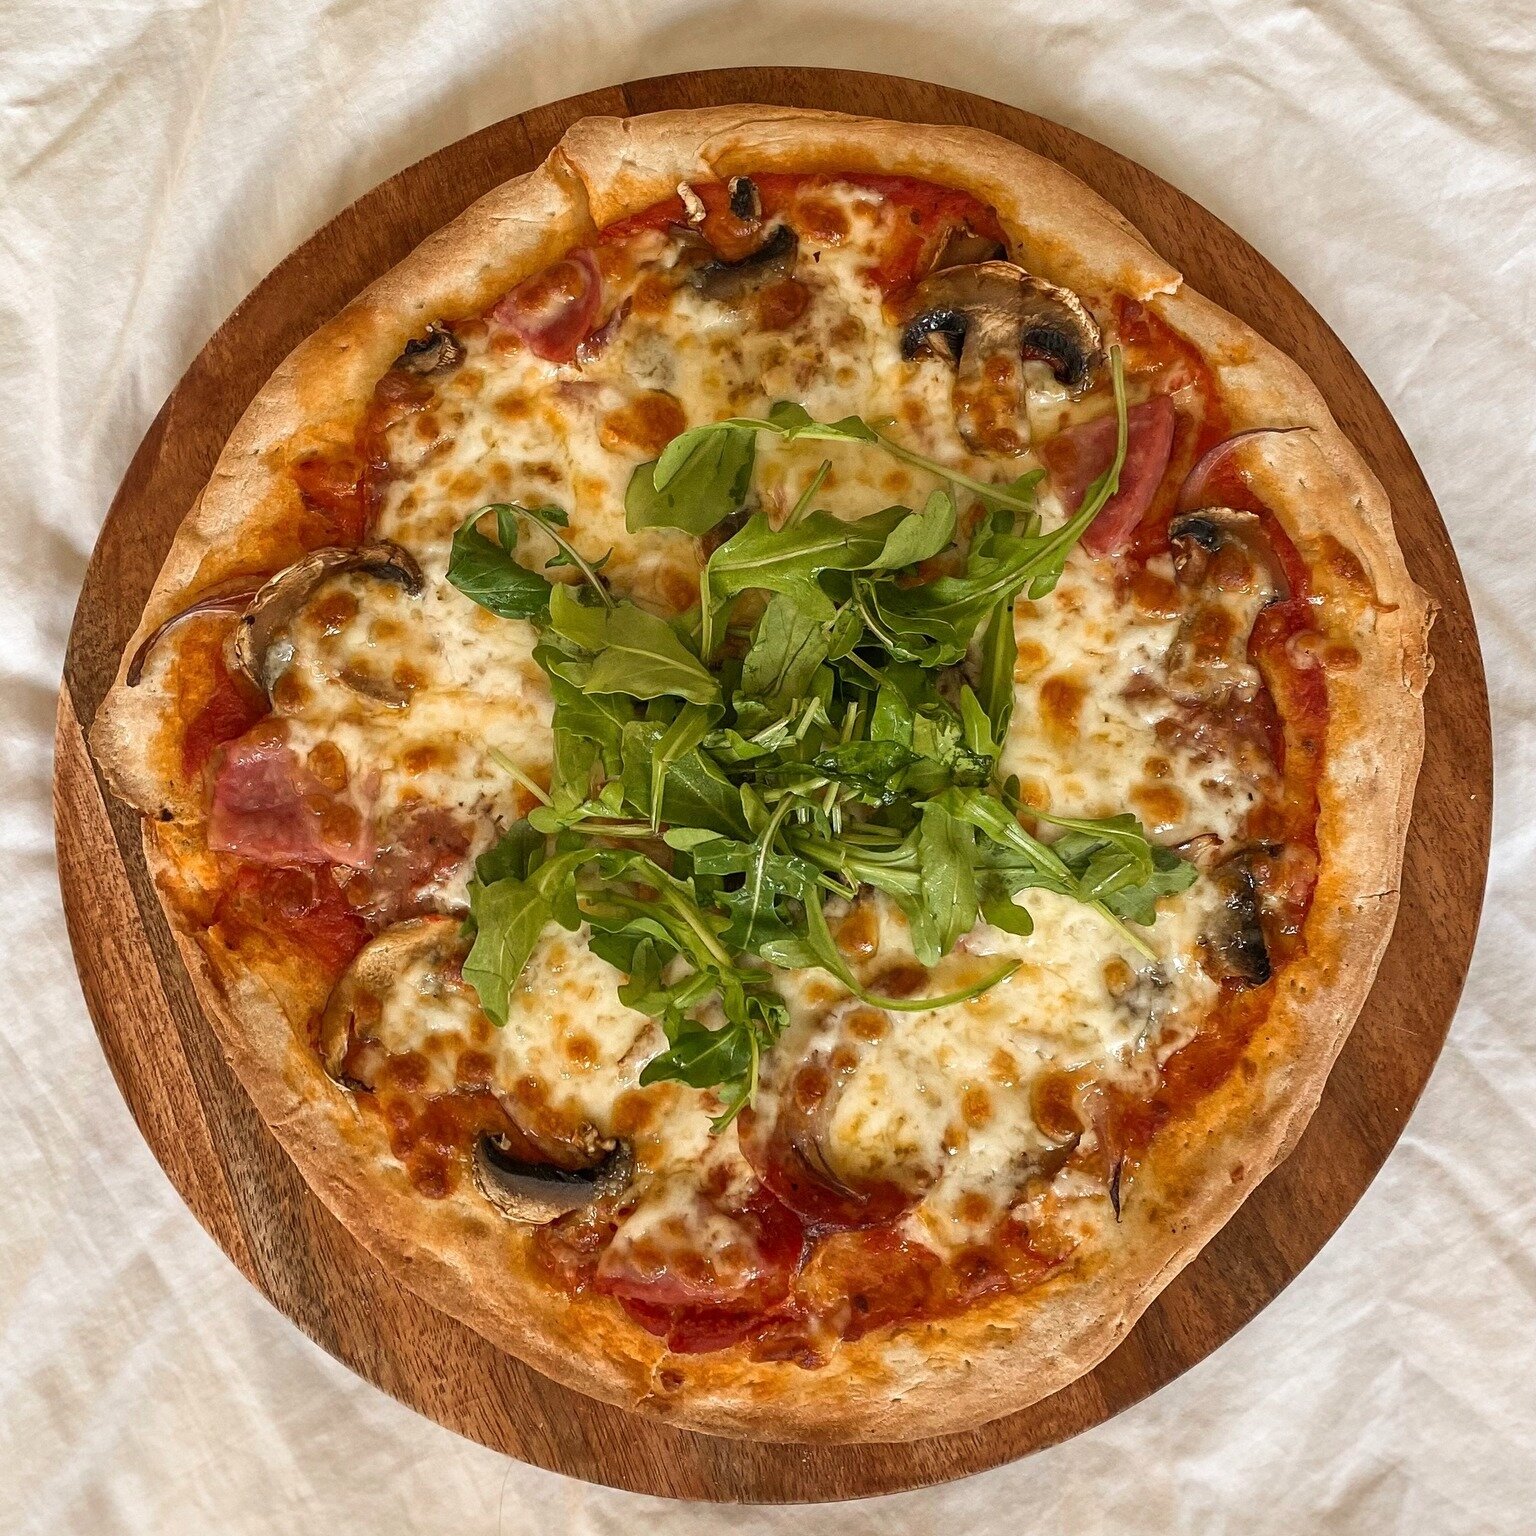 We all love things that are perfectly imperfect, right?

That's why you'll love @perfectlyimperfectpizza handmade, woodfired pizza bases - some may not be perfectly round but they taste perfect! The range includes fully prepared Kids, Meat, Vegetaria